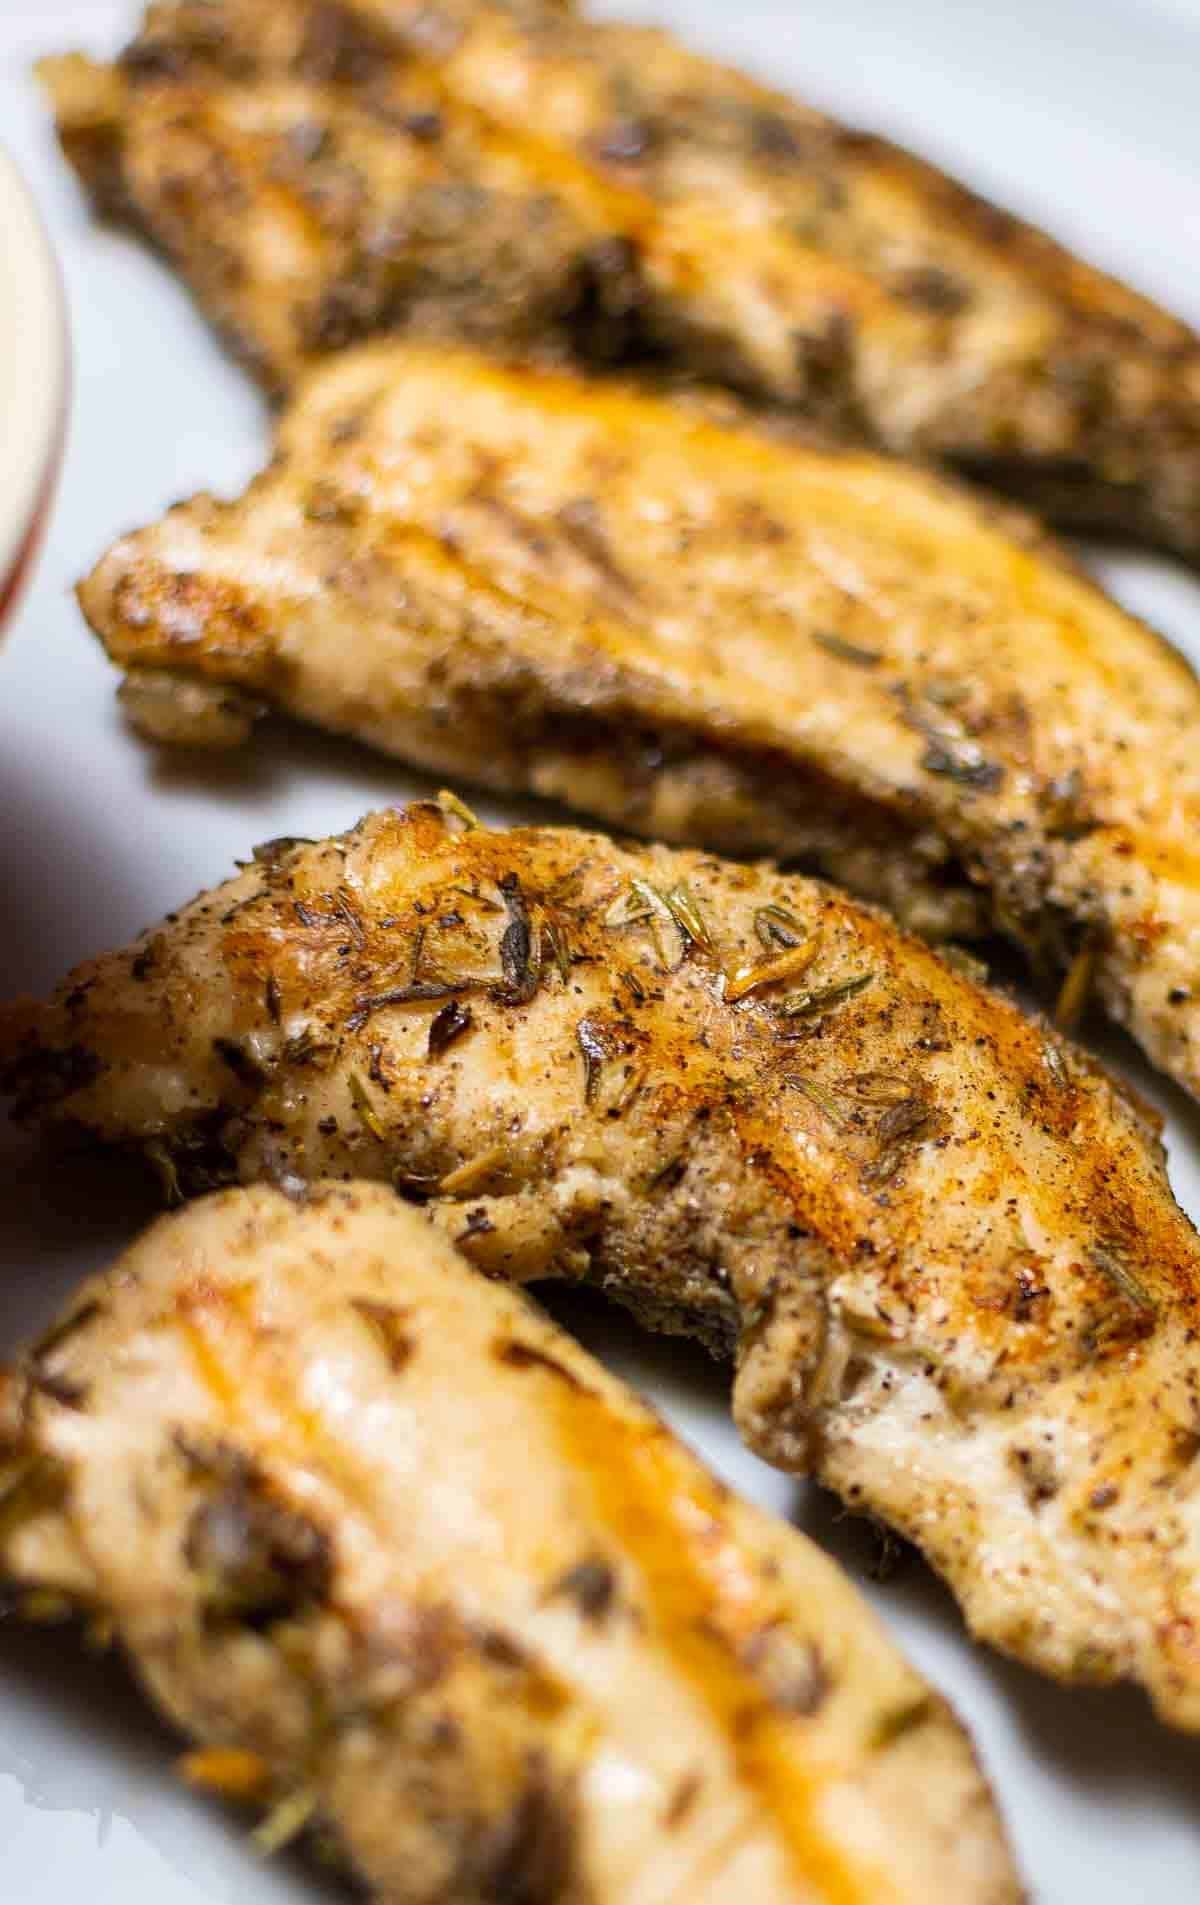 Baked chicken tenders with herbs